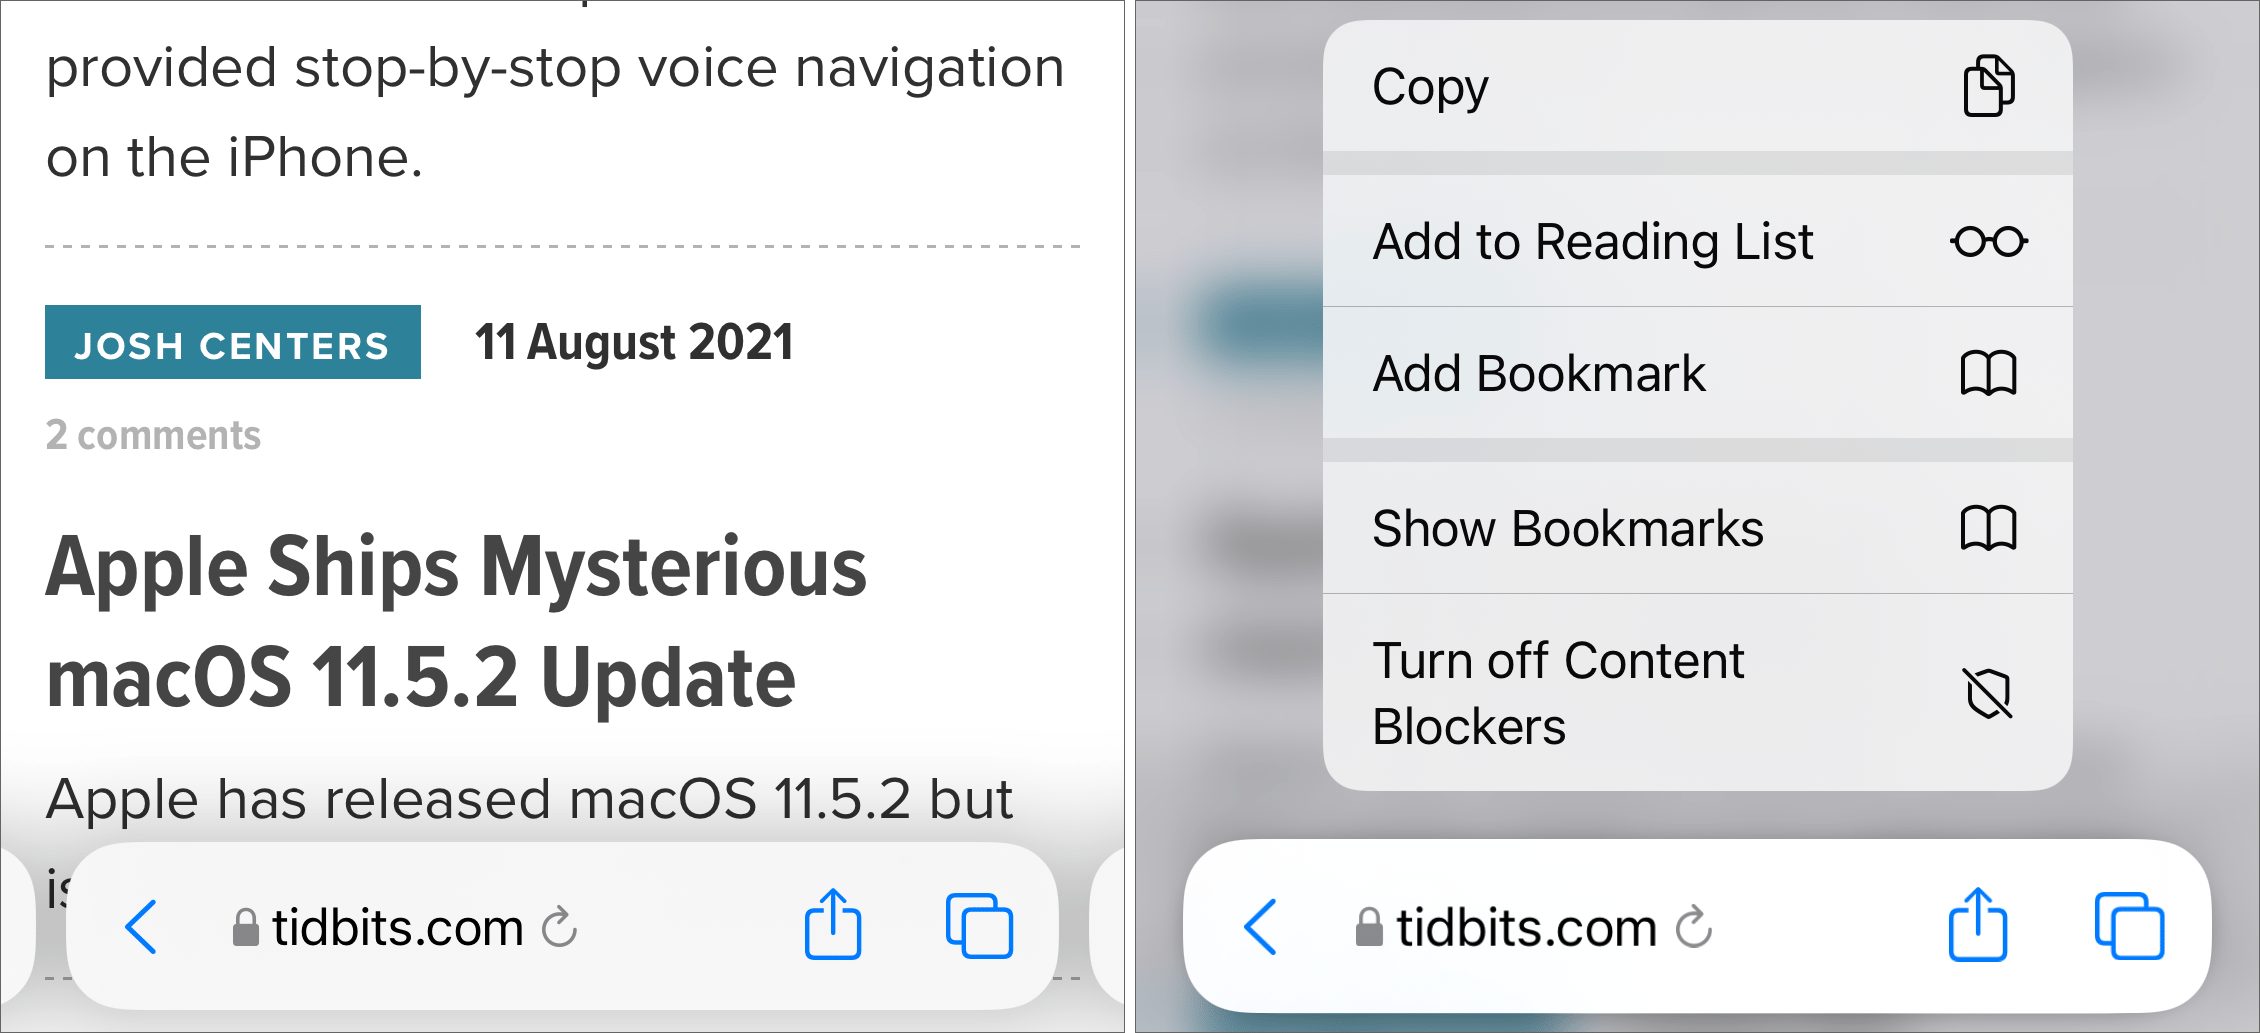 Hot New Features in Safari in iOS 15 and iPadOS 15 - TidBITS